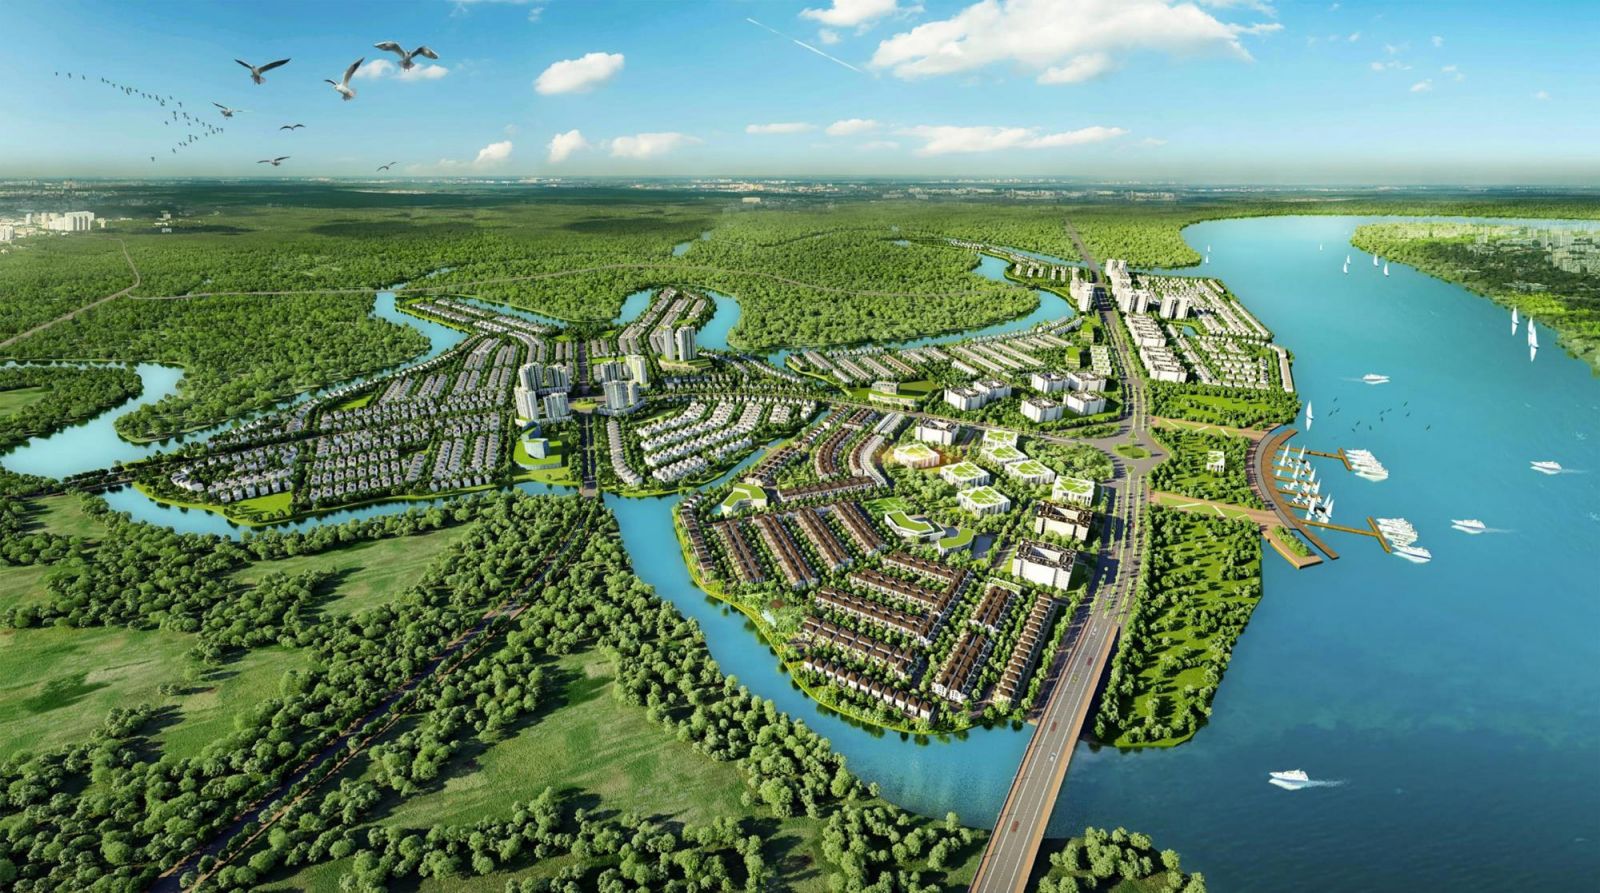 The Aqua ecological urban development project developed by Novaland in Dong Nai province.